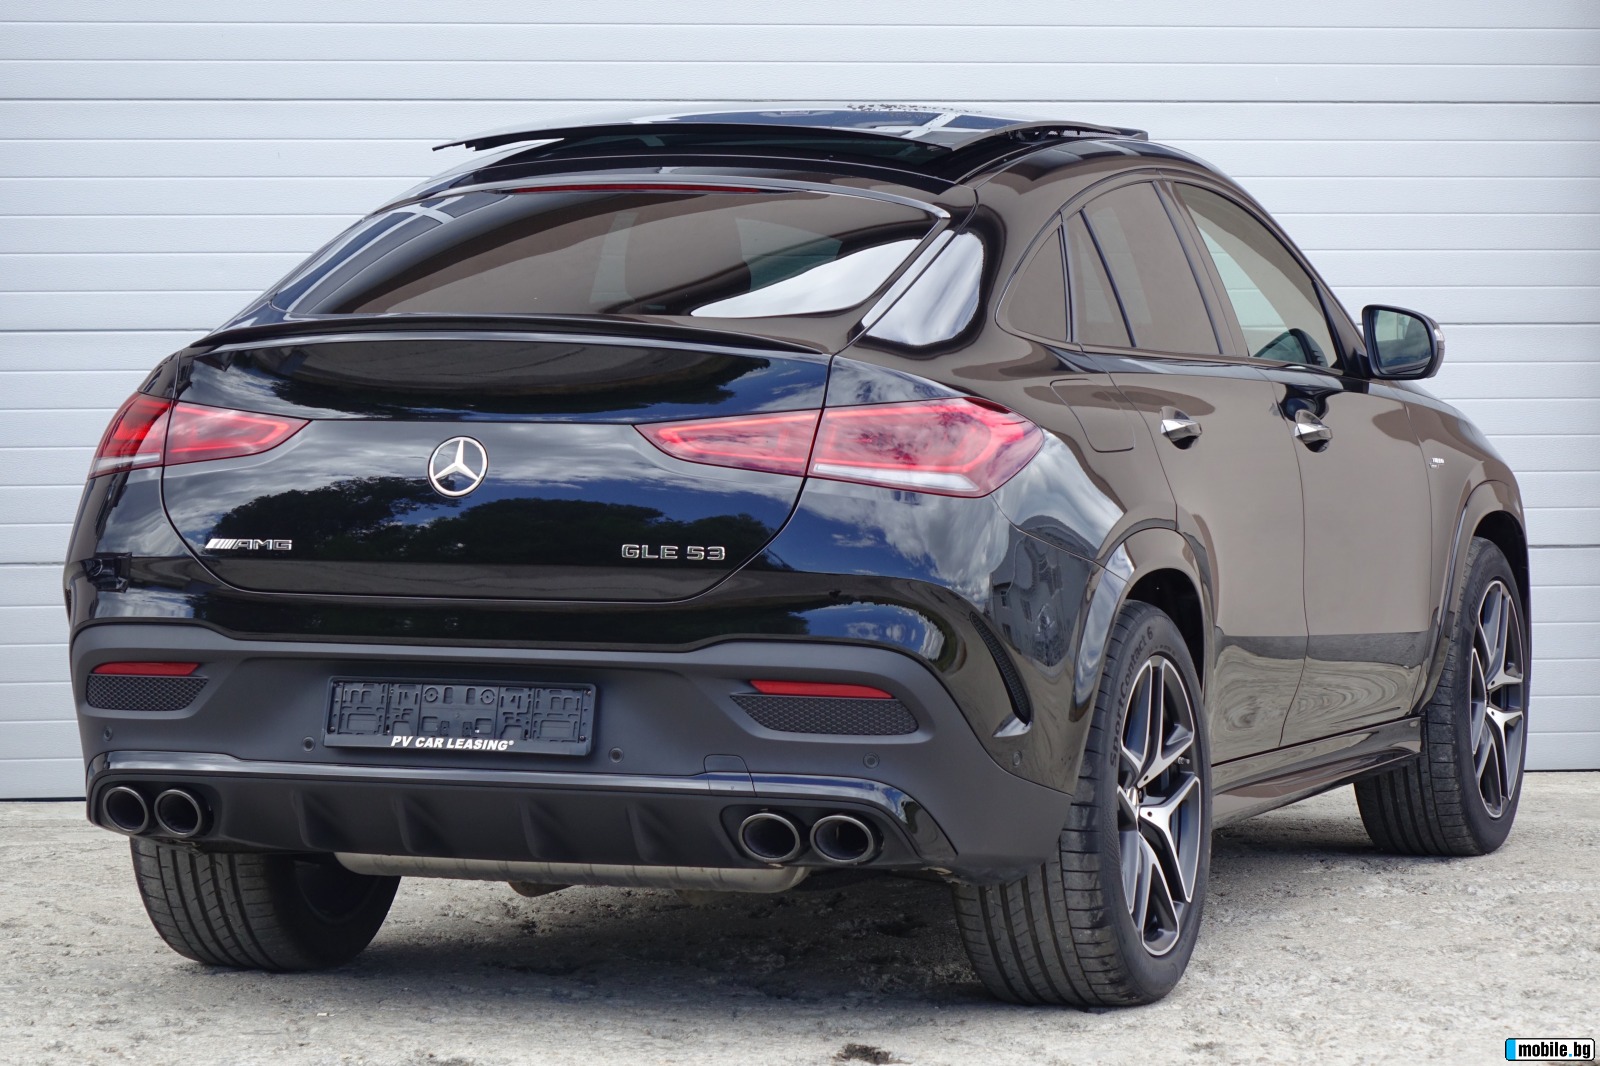 Mercedes-Benz GLE 53 4MATIC + COUPE | Mobile.bg   7